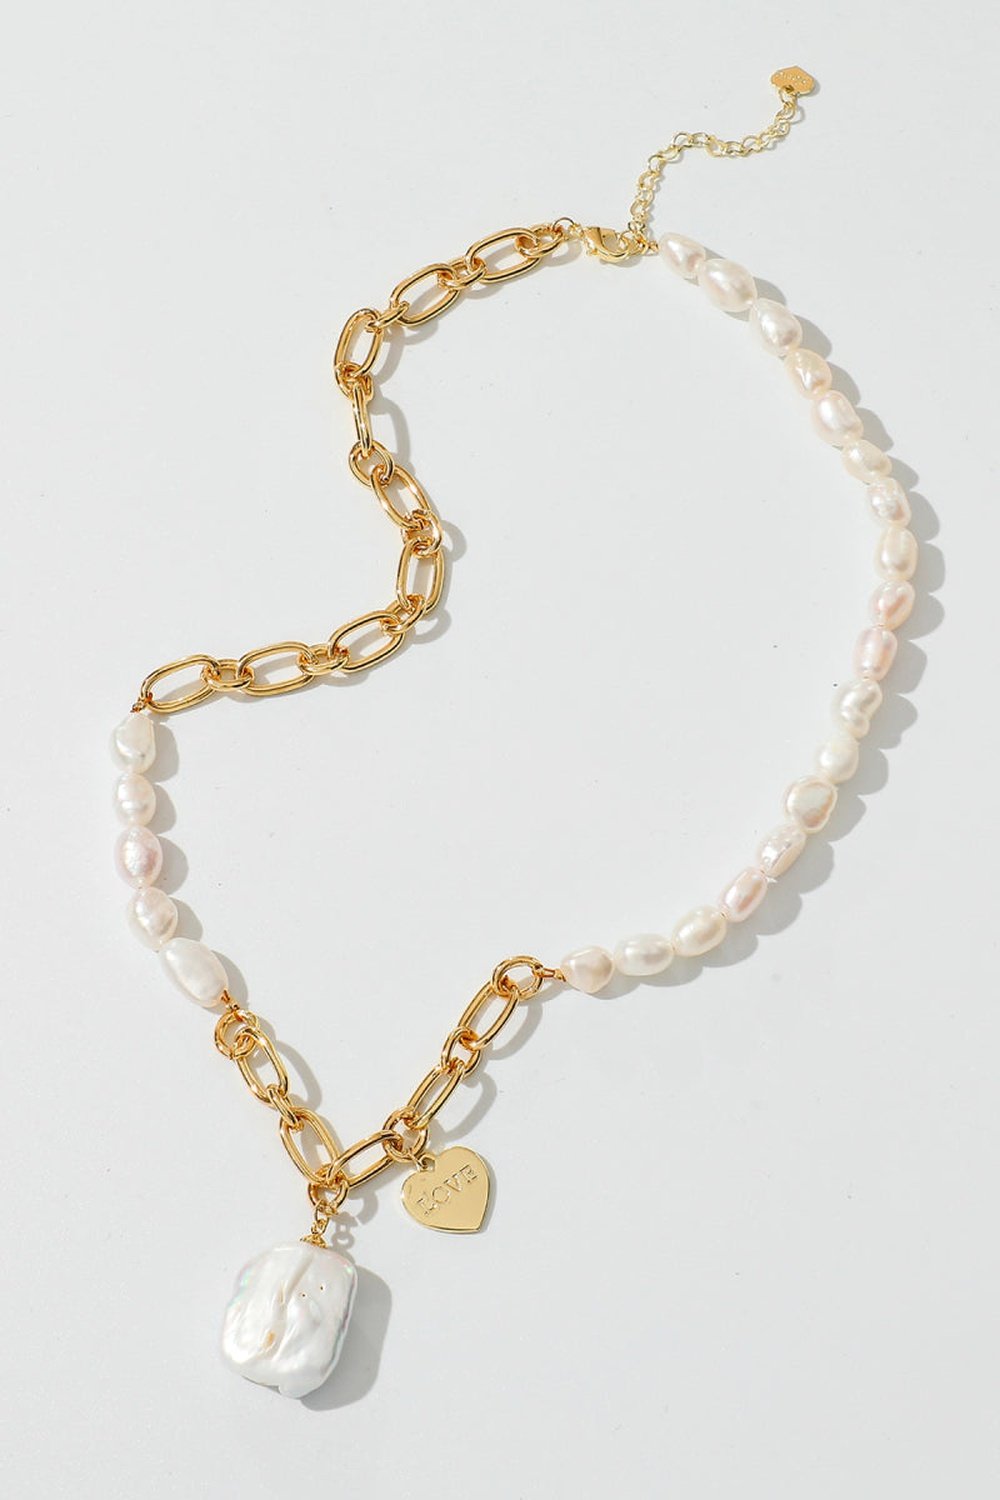 Gold Chain & Pearl Necklace - Necklaces - FITGGINS